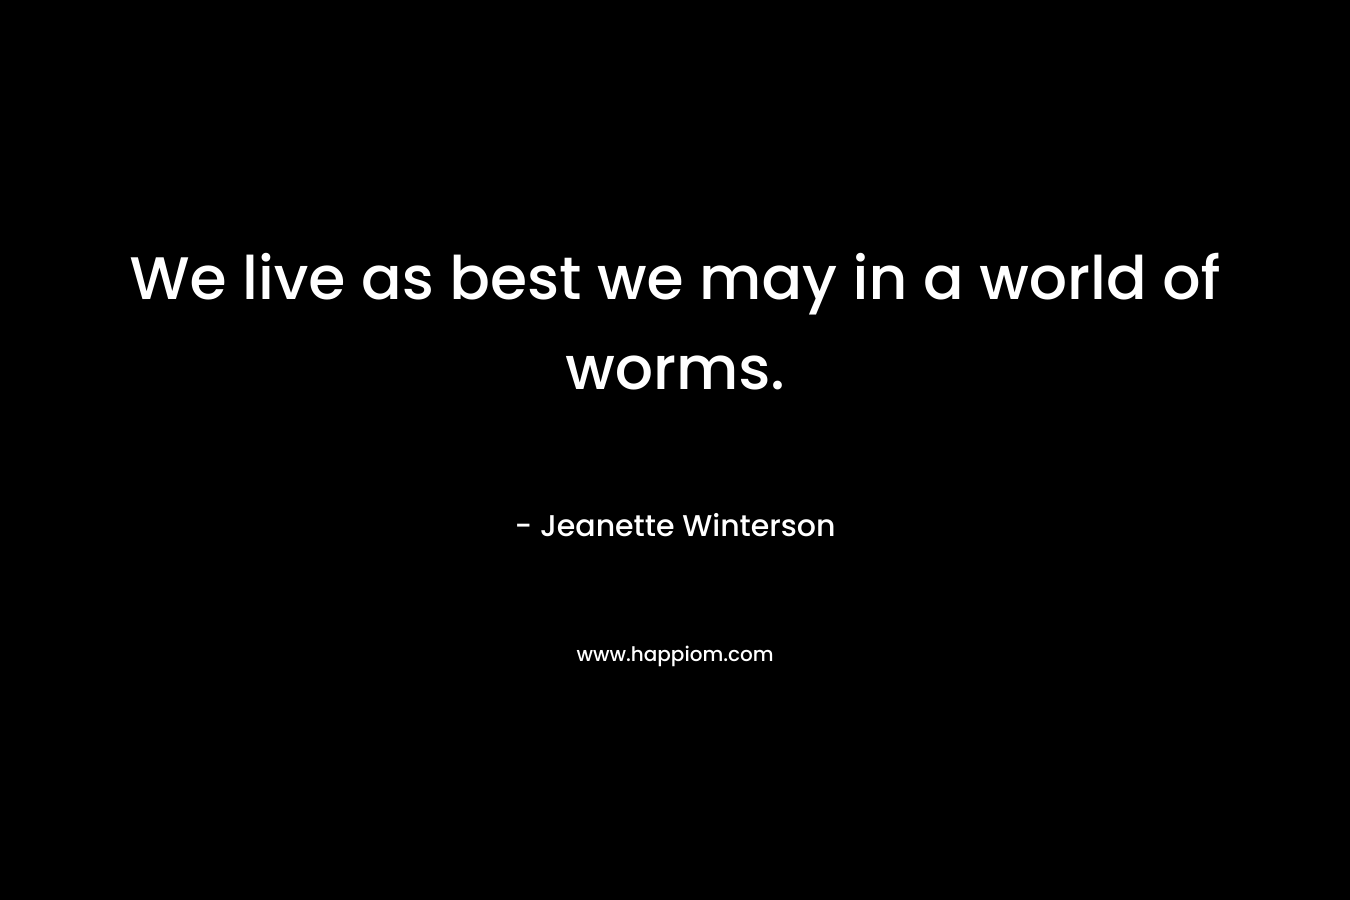 We live as best we may in a world of worms.